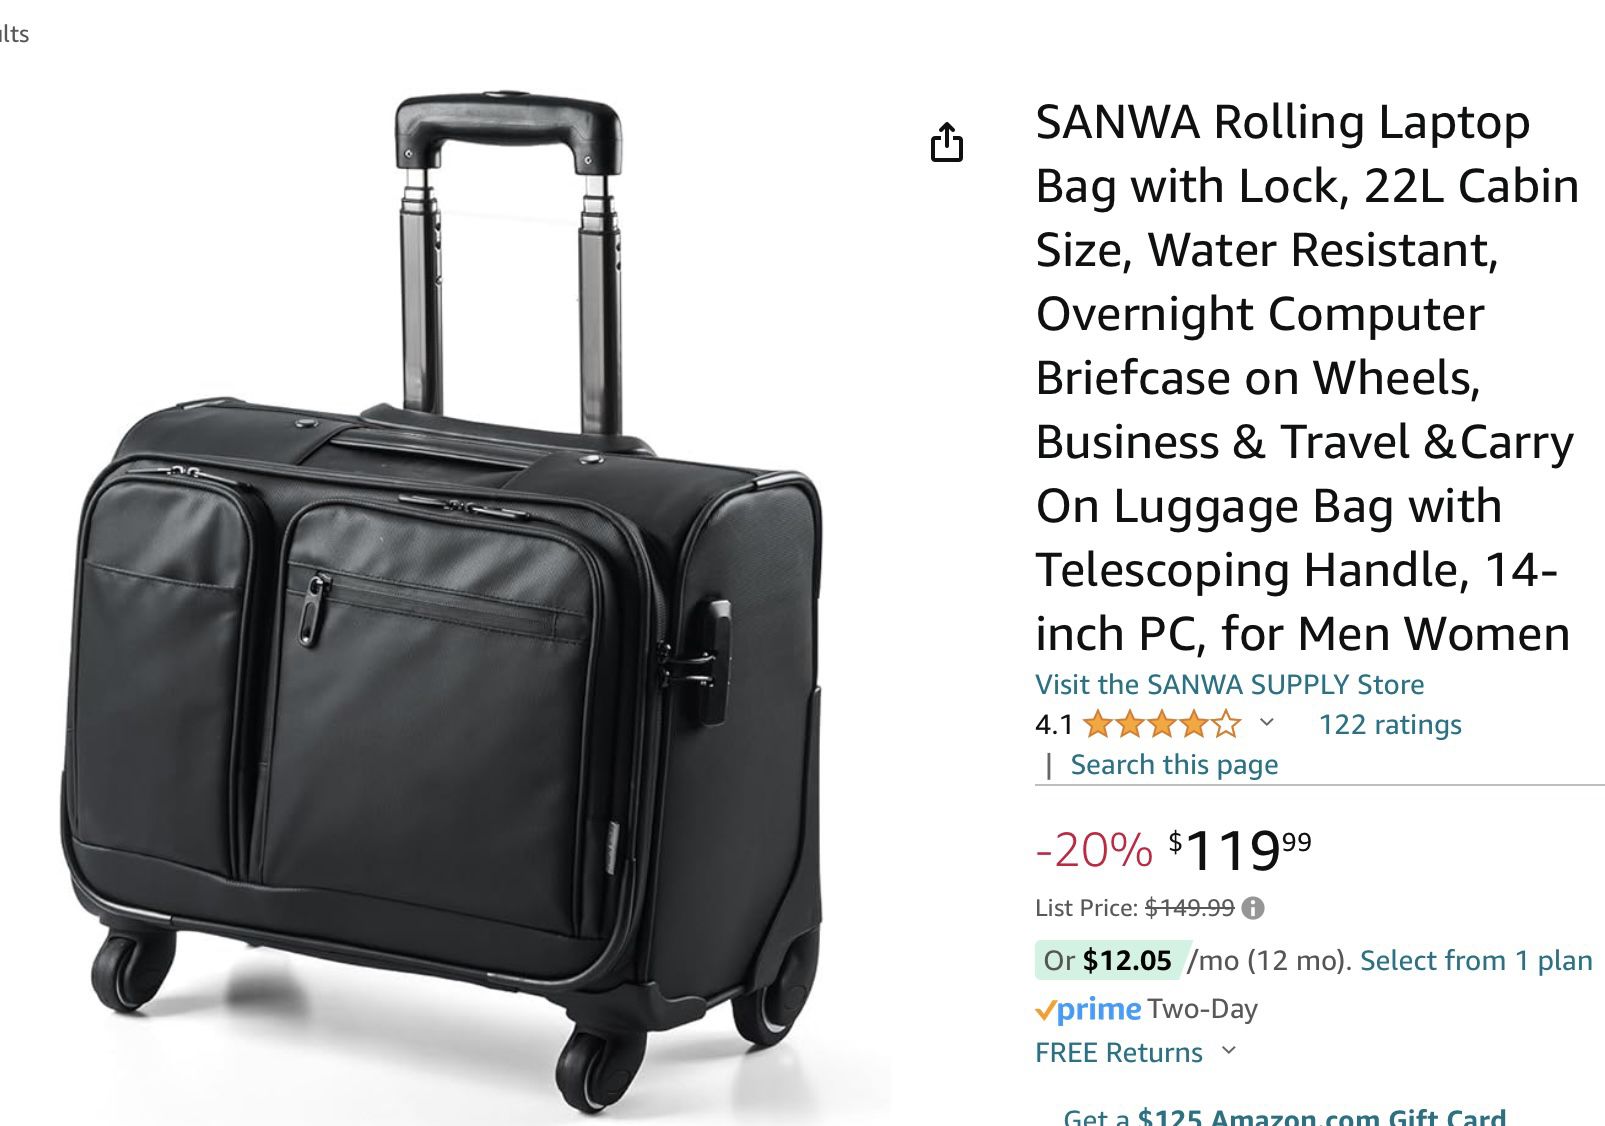 Rolling Laptop Bag With Lock, 22L Carry One Size Water Resistant